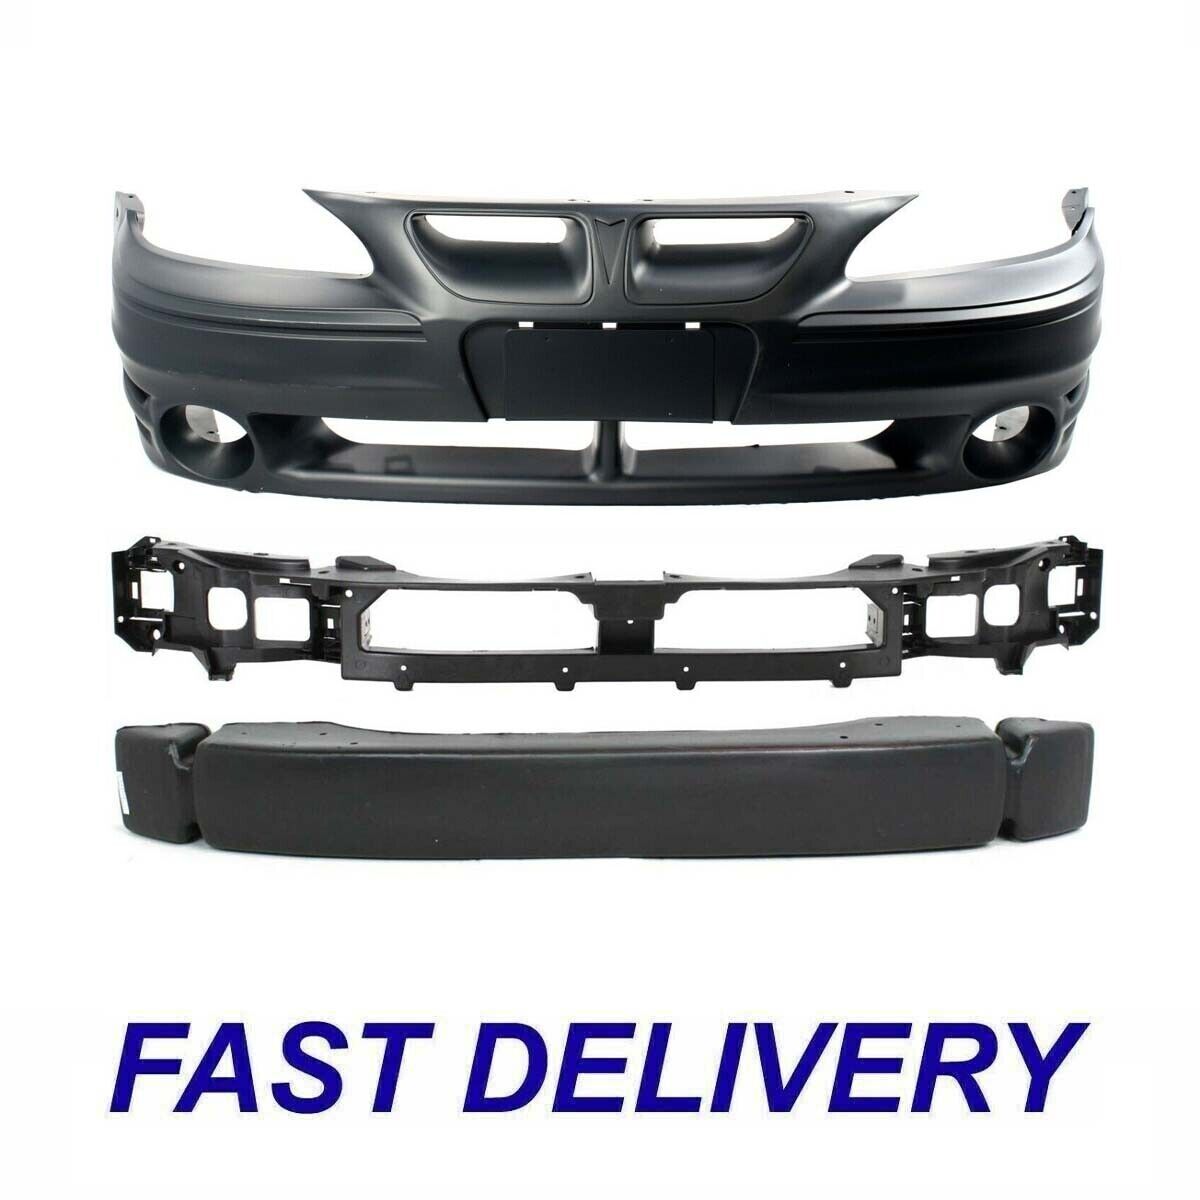 New Set of 3 Front Bumper Cover Kit Fits 1999-2005 Pontiac Grand Am